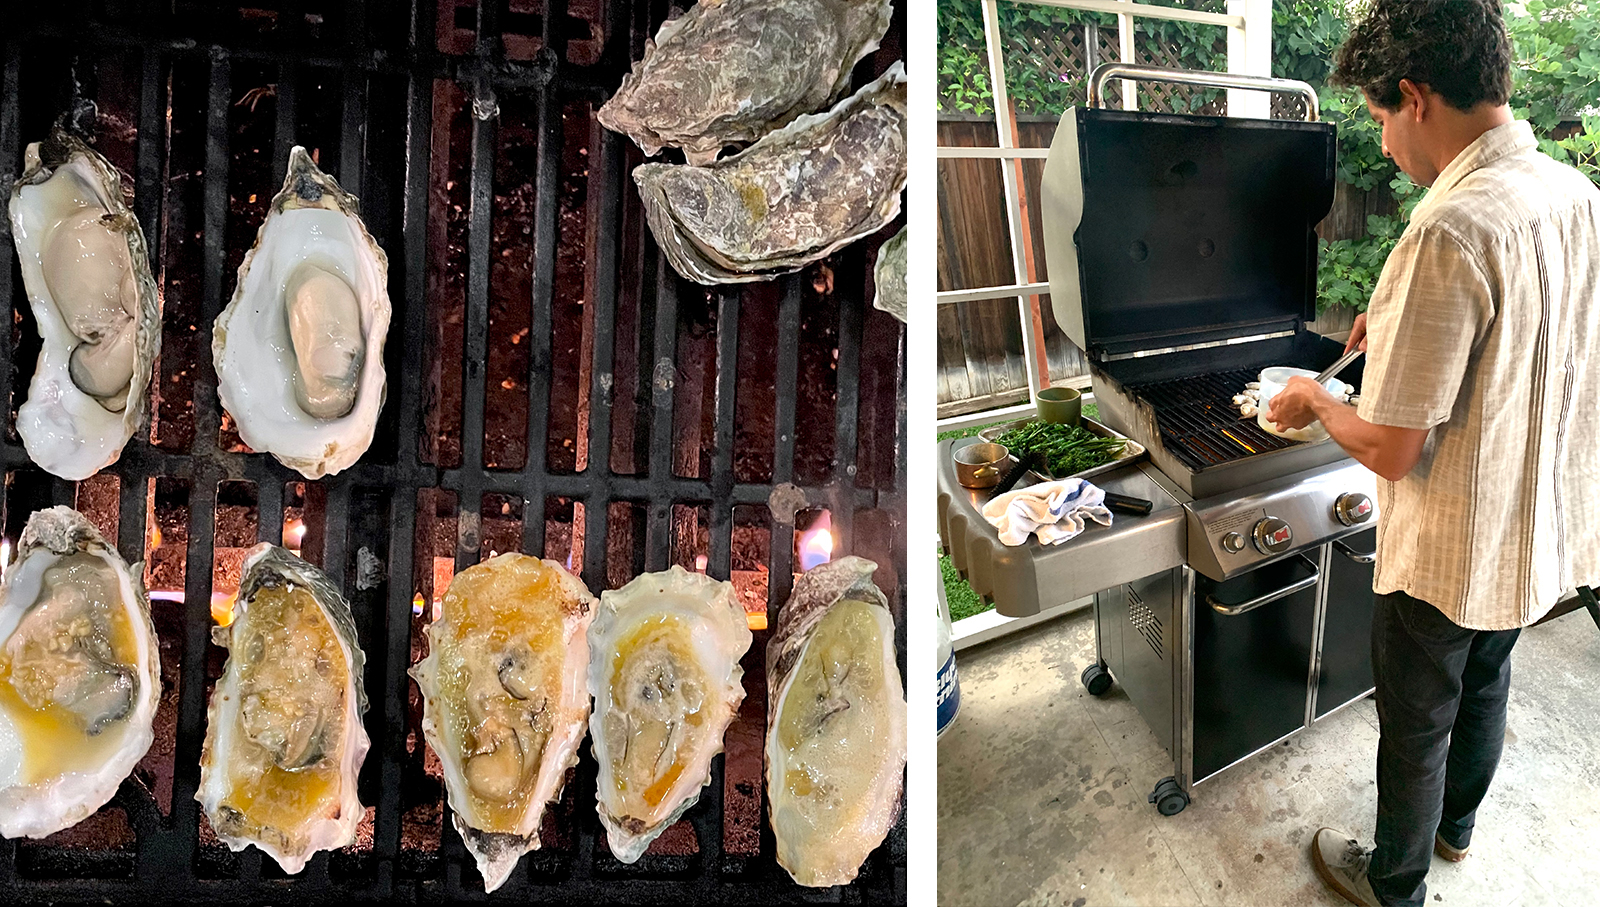 Man cooking at grill and oysters on the grill